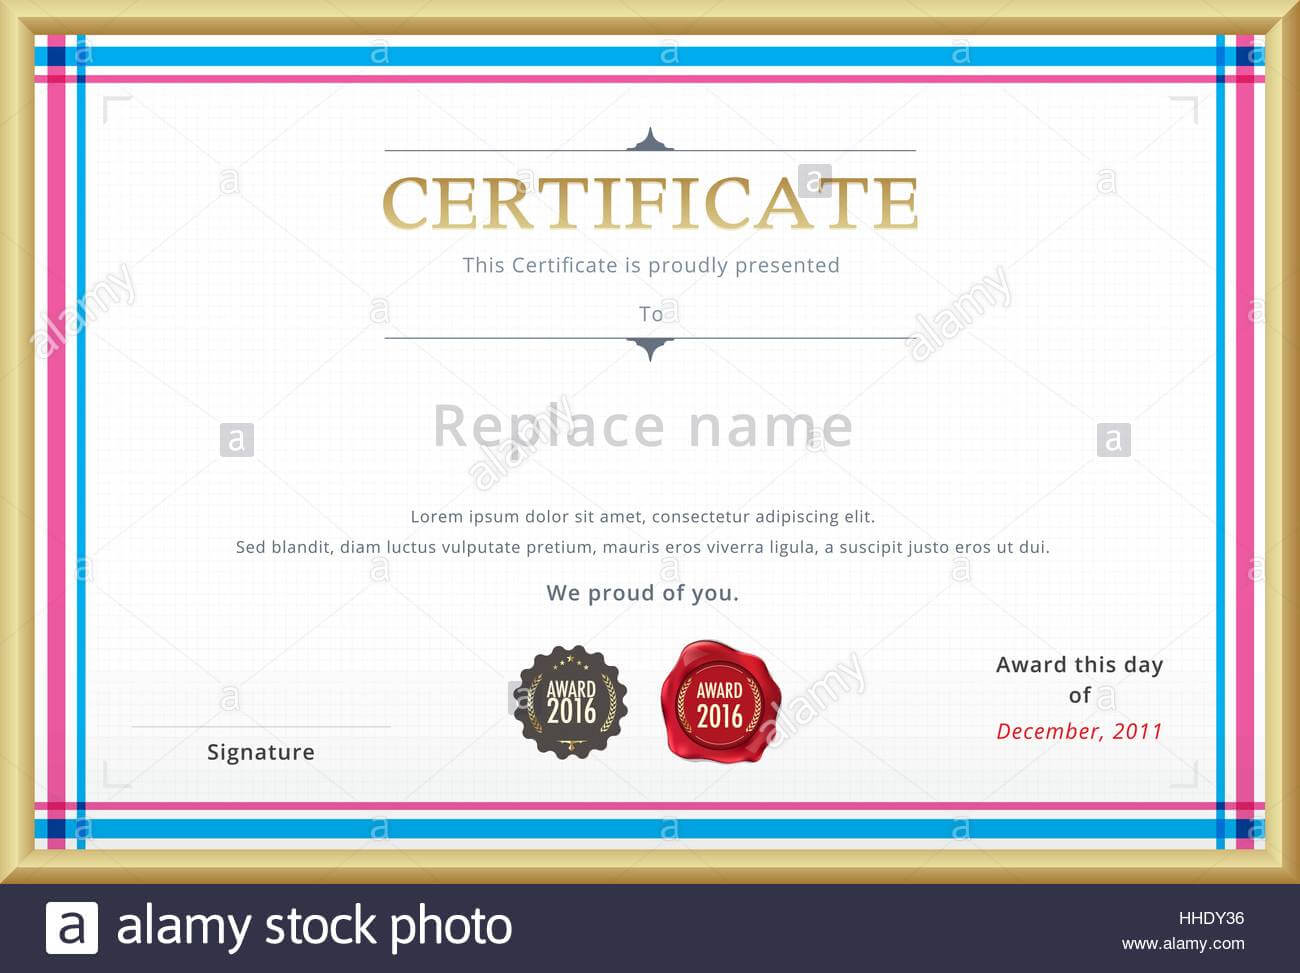 Qualification Certificate Template Stock Photos Within Qualification Certificate Template